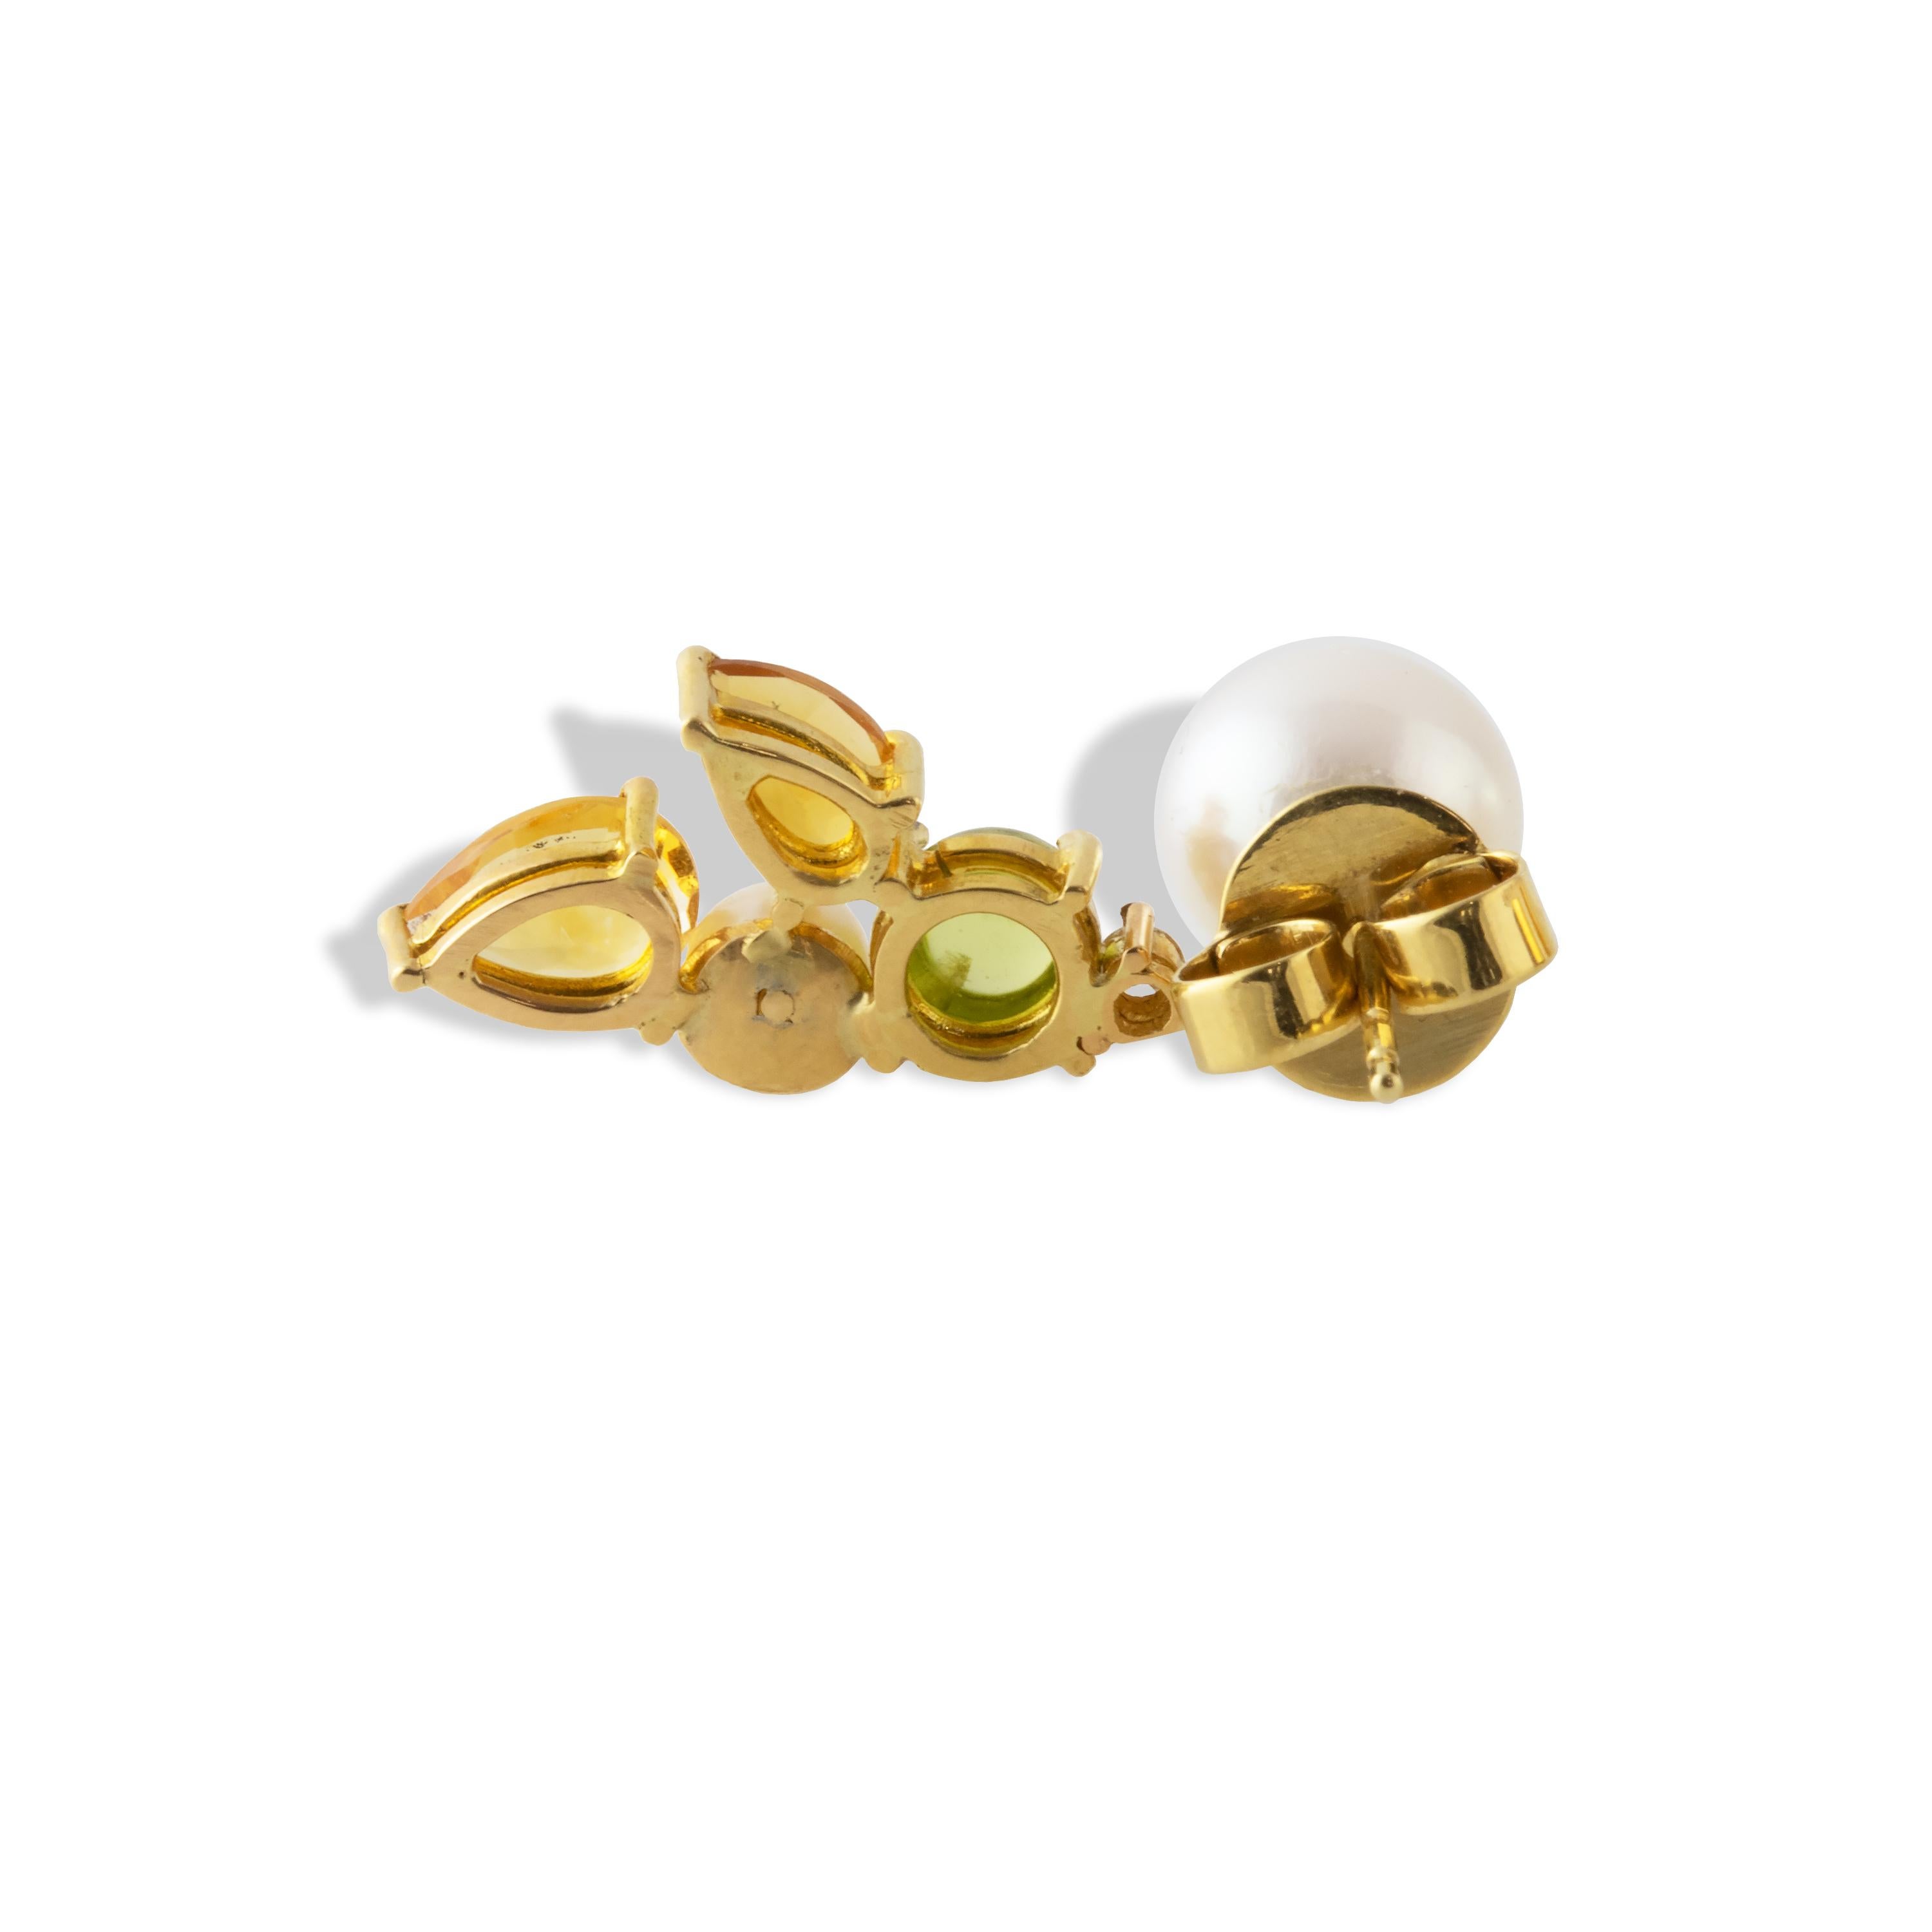 These 'Limoncello' asymmetrical earrings are named after the colors of the Amalfi Coastline and feature Akoya pearls, Citrine, Peridot and a diamond.  One one side sits an 8.5mm pearl with a golden tip, while the other side features an 8.5mm and